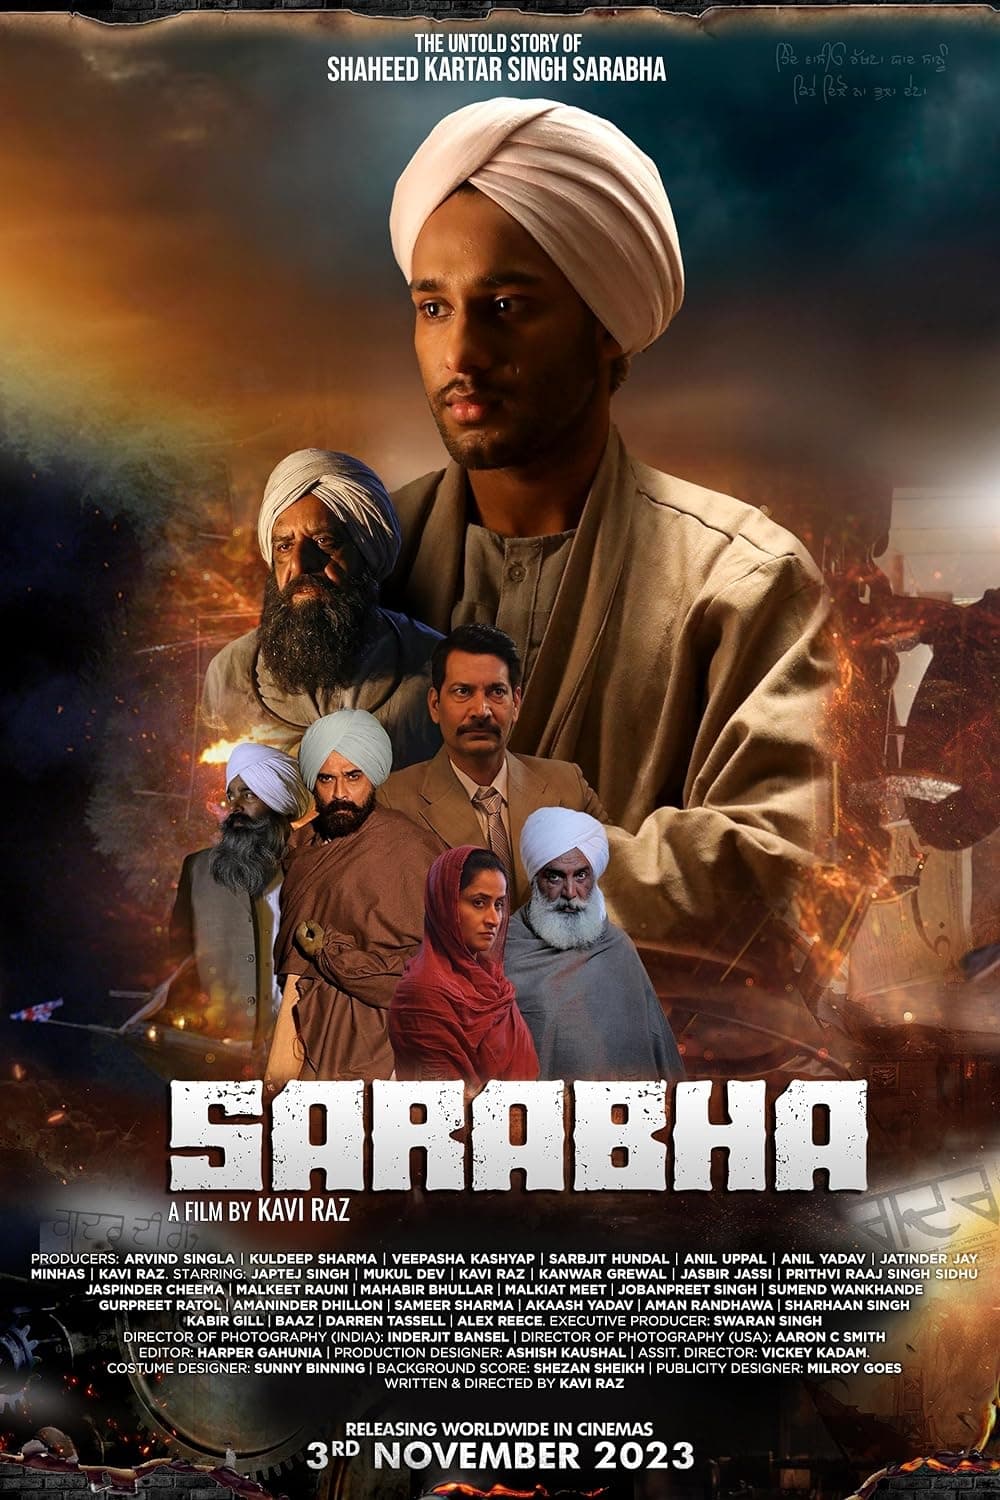 Poster for the movie "Sarabha"